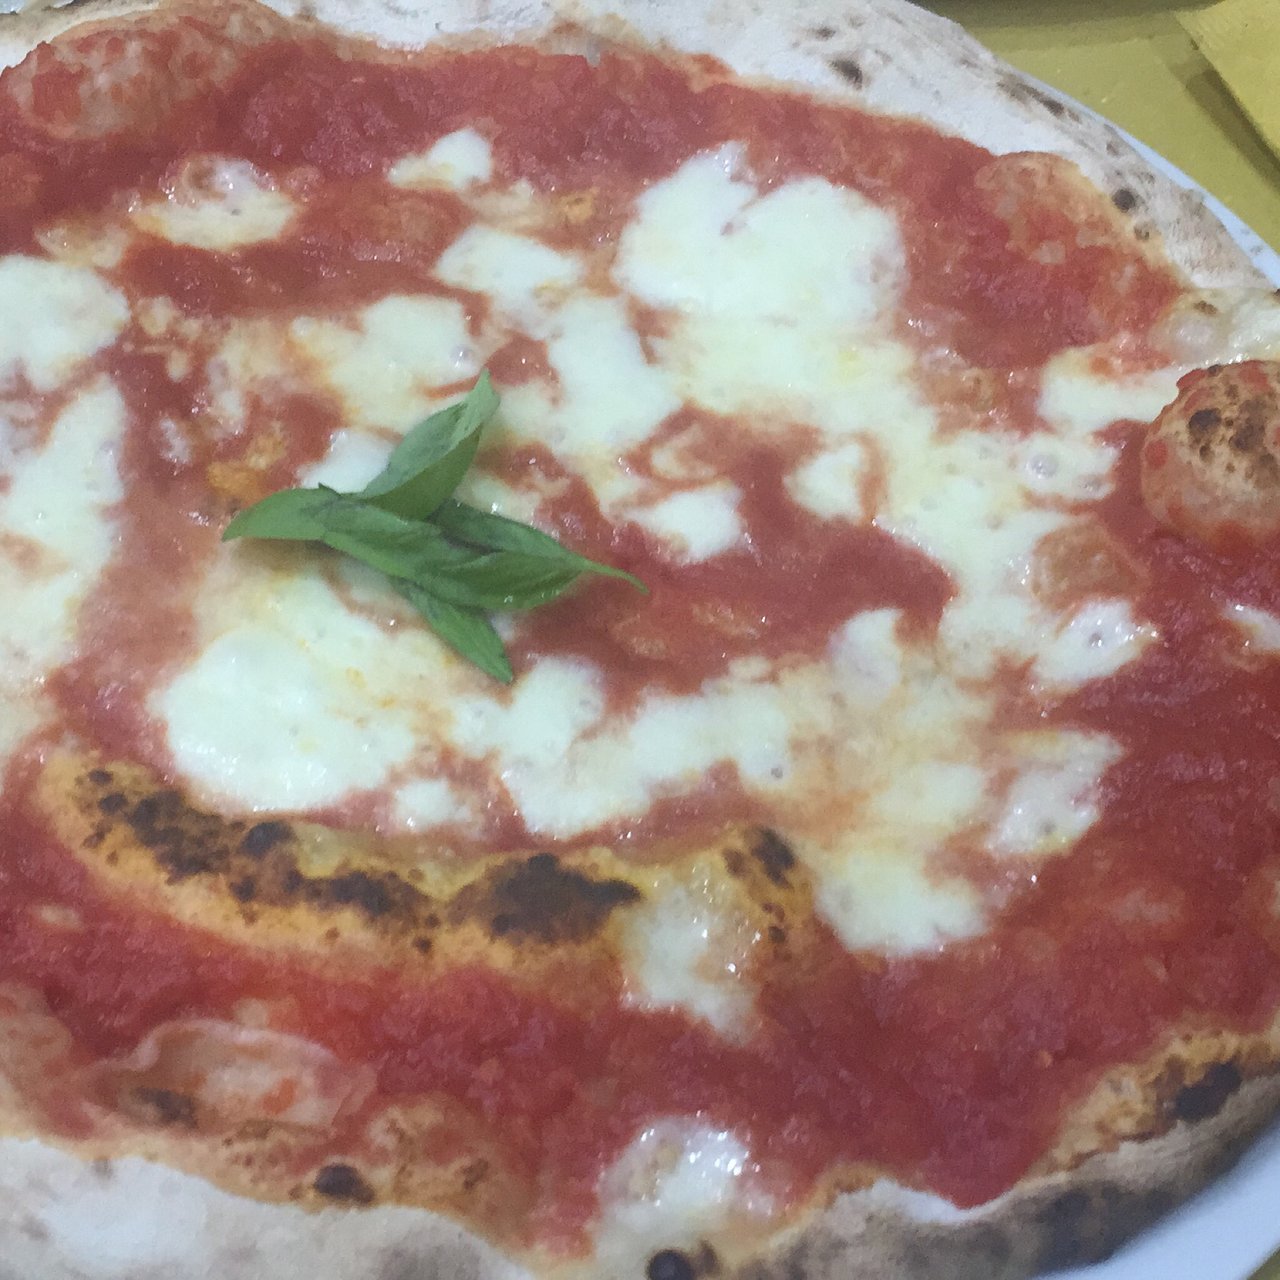 Pizzeria "made In Sud", Sezze